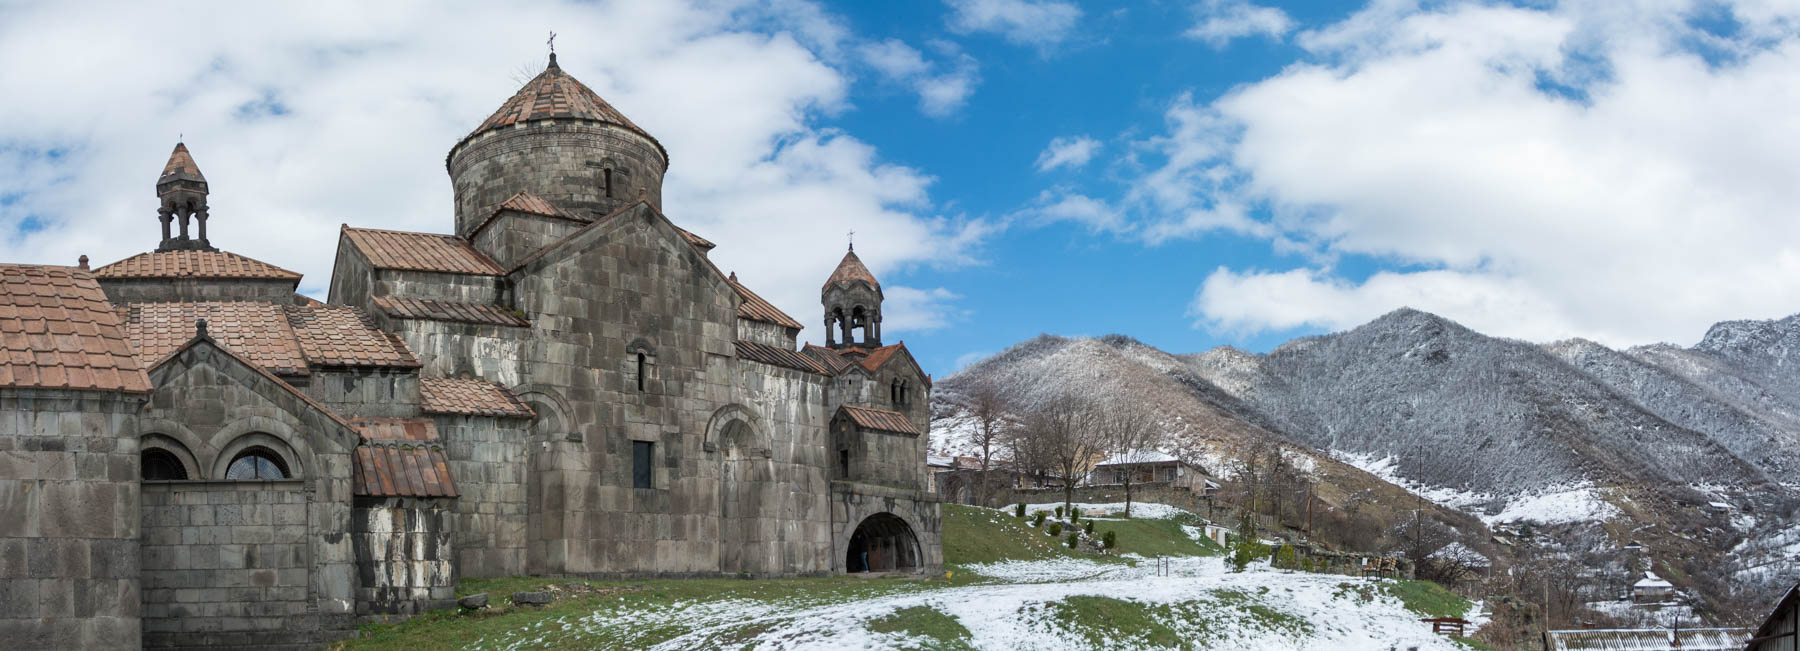 Our visit to Haghpat monastery: the view from the outside.